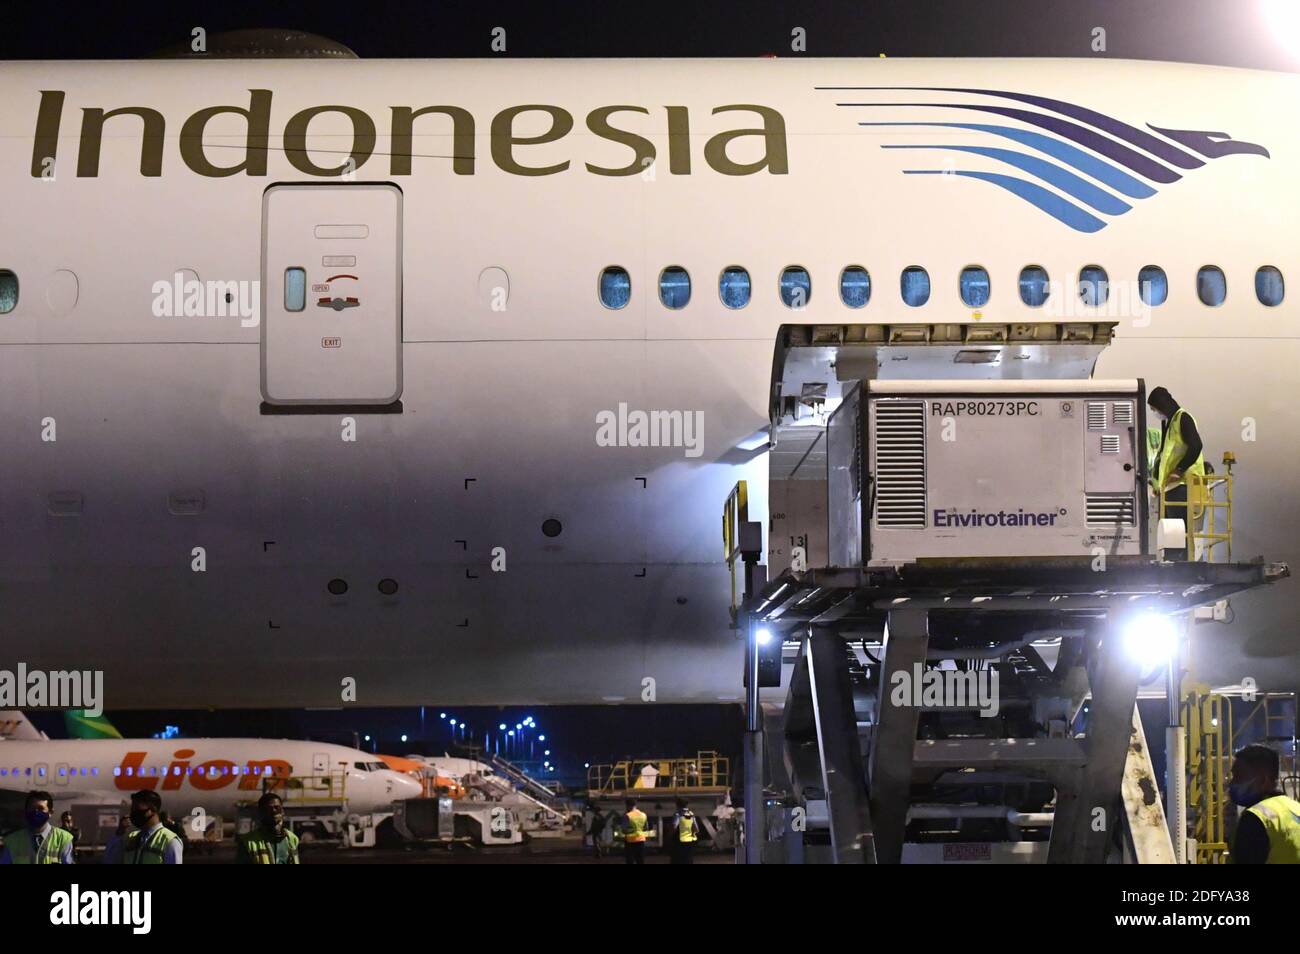 (201207) -- JAKARTA, Dec. 7, 2020 (Xinhua) -- Workers unload vaccine supplies from China's Sinovac at the Soekarno-Hatta International Airport in Tangerang district of Banten Province in Indonesia, Dec. 6, 2020. COVID-19 vaccines from China were in good condition upon arrival in Indonesia and refrigeration vehicles for delivery have been well prepared to keep the vaccines undamaged and safe, Health Minister Terawan Agus Putranto said on Monday. A vaccine storage warehouse has also been prepared to accommodate 1.2 million doses of the Sinovac vaccine from China with cold chain management fo Stock Photo